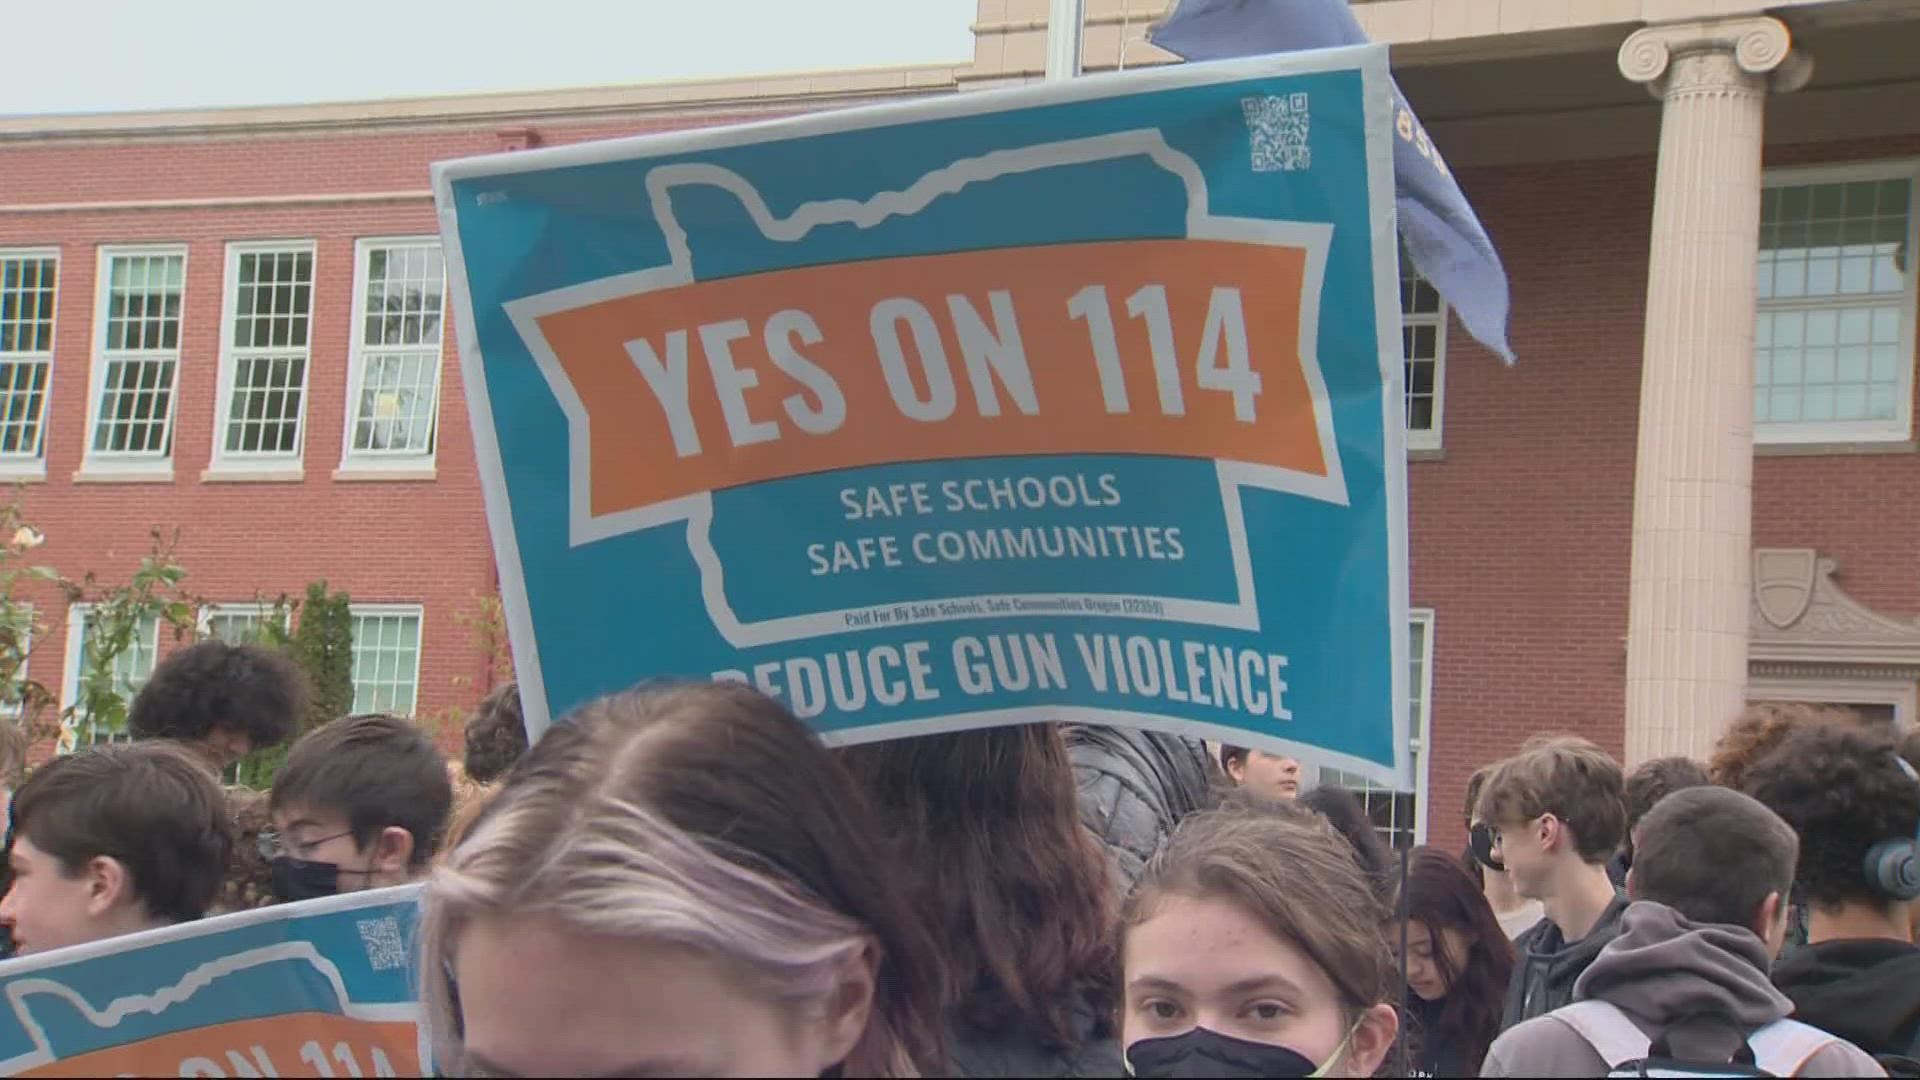 Measure 114 would increase gun control in Oregon, and if passed it would be the strictest gun control measure in the nation.